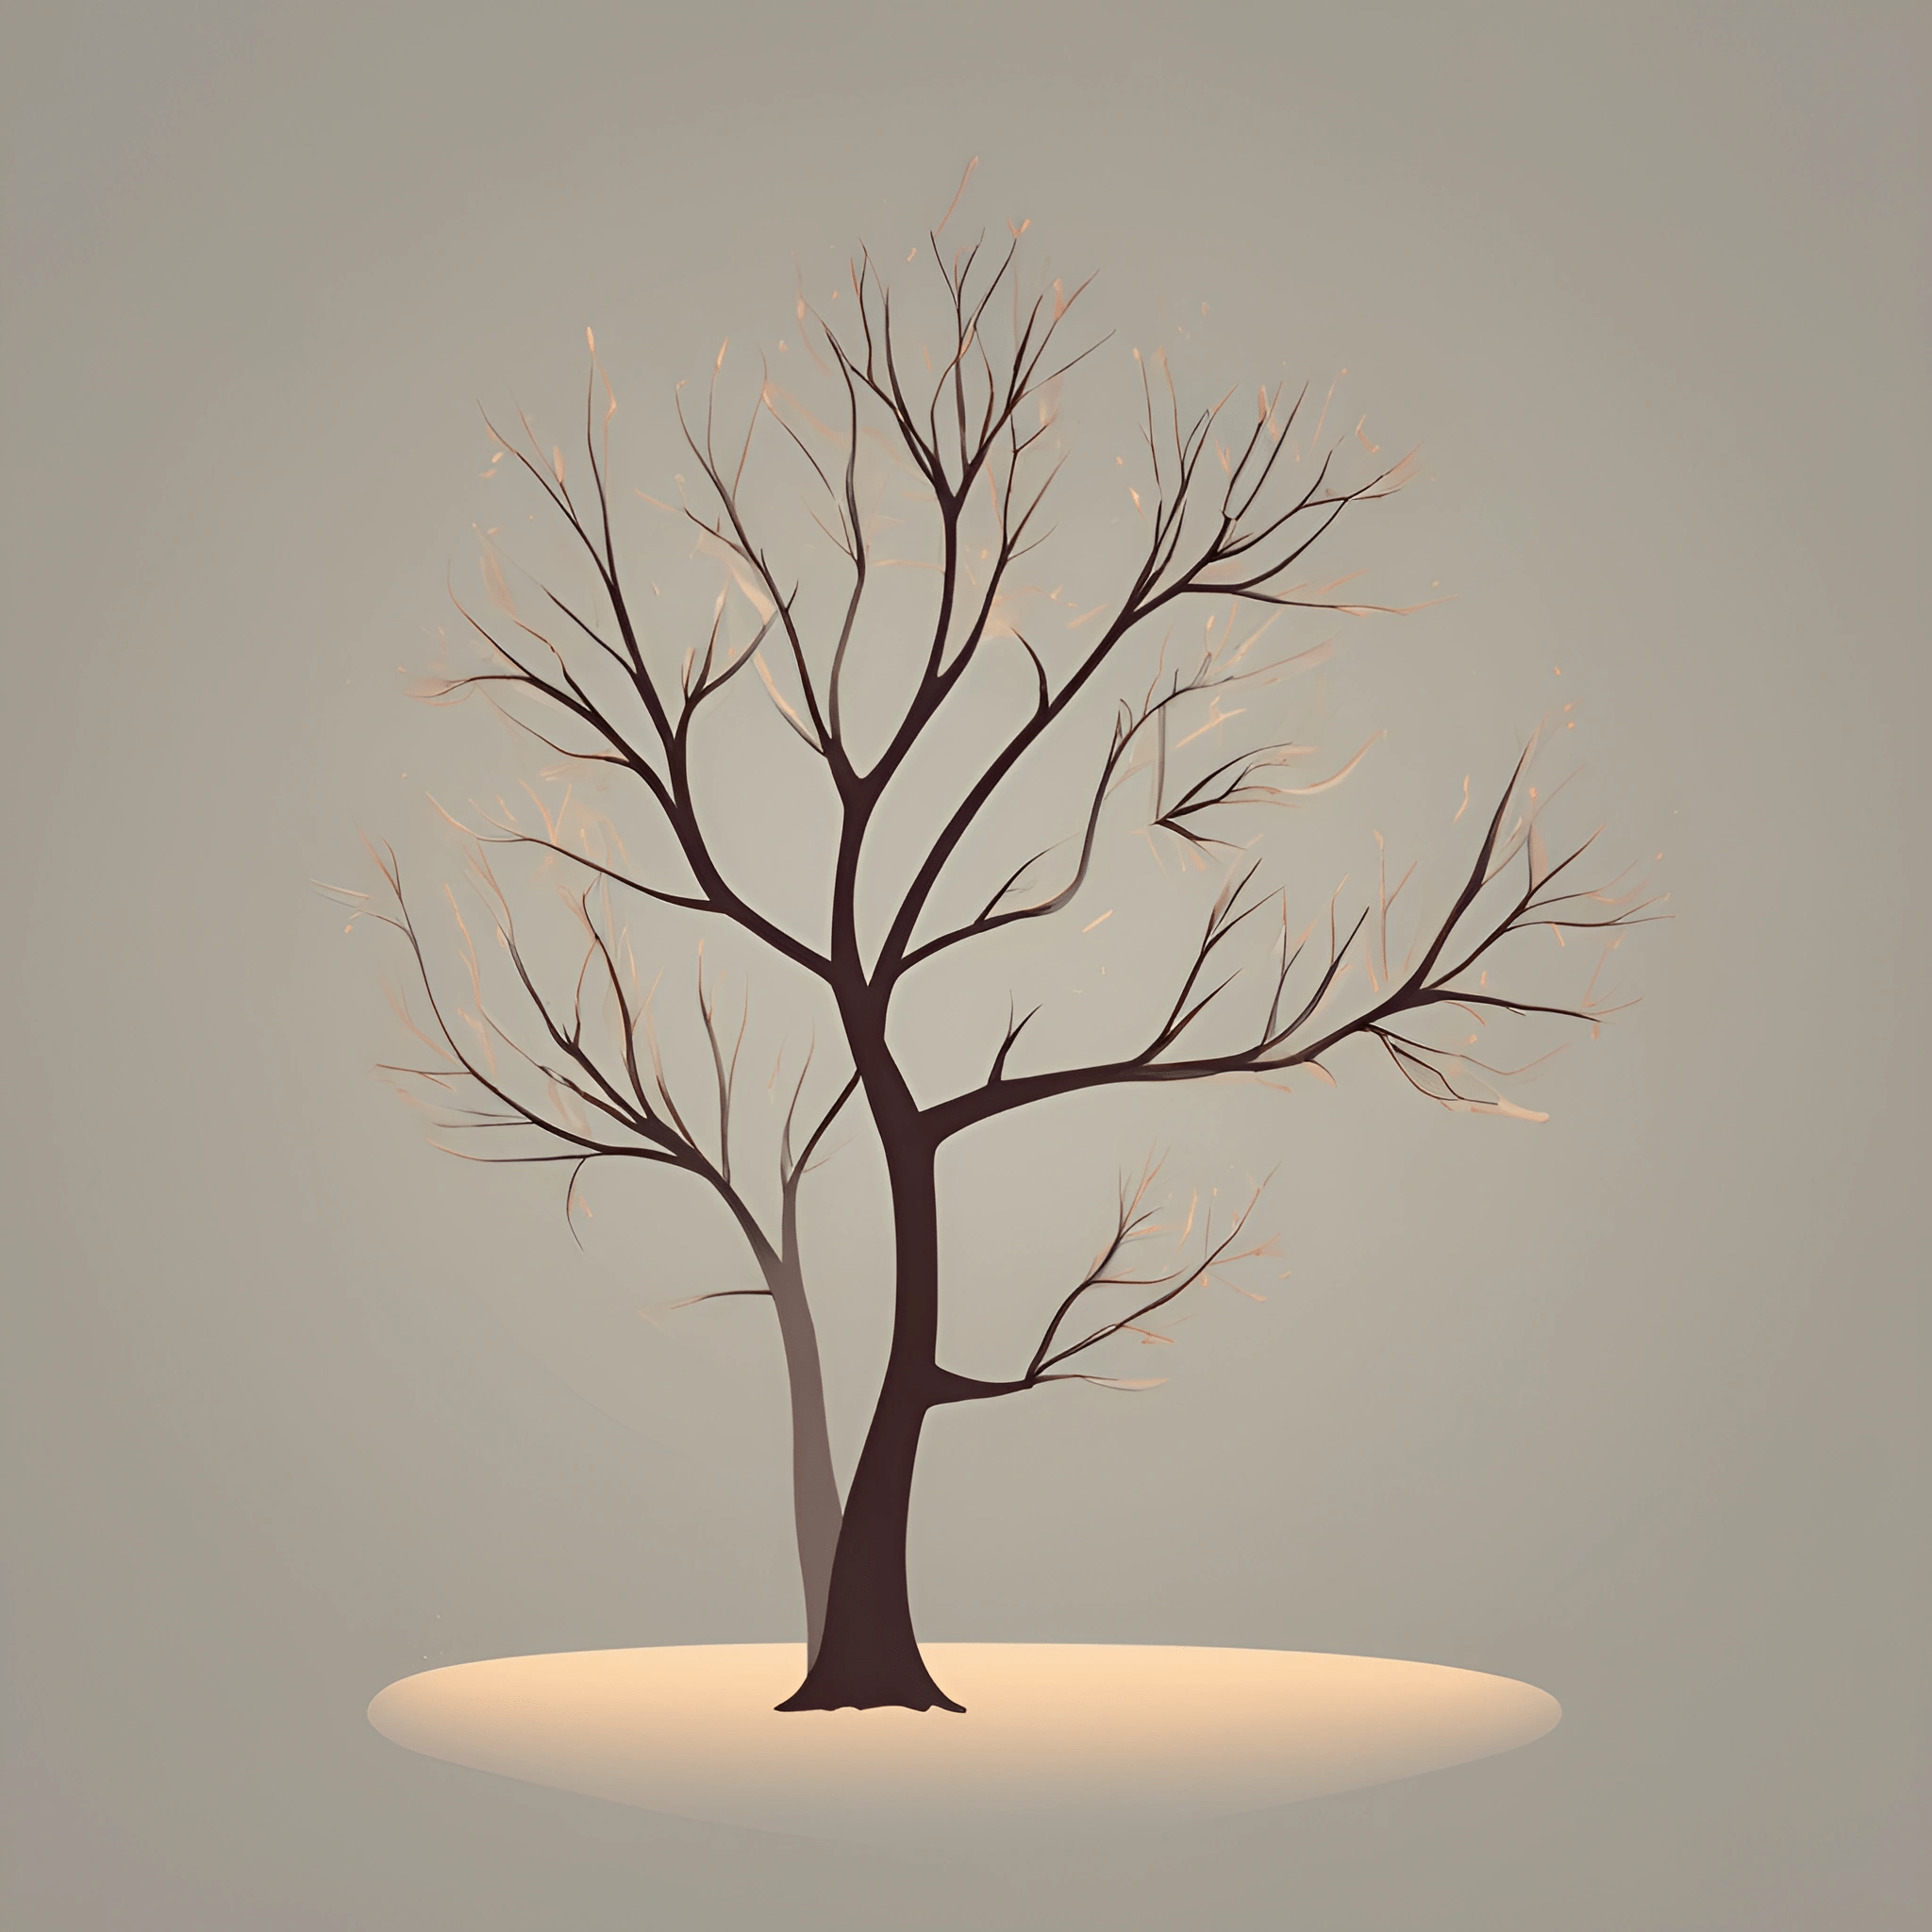 a tree with no leaves on it in the snow